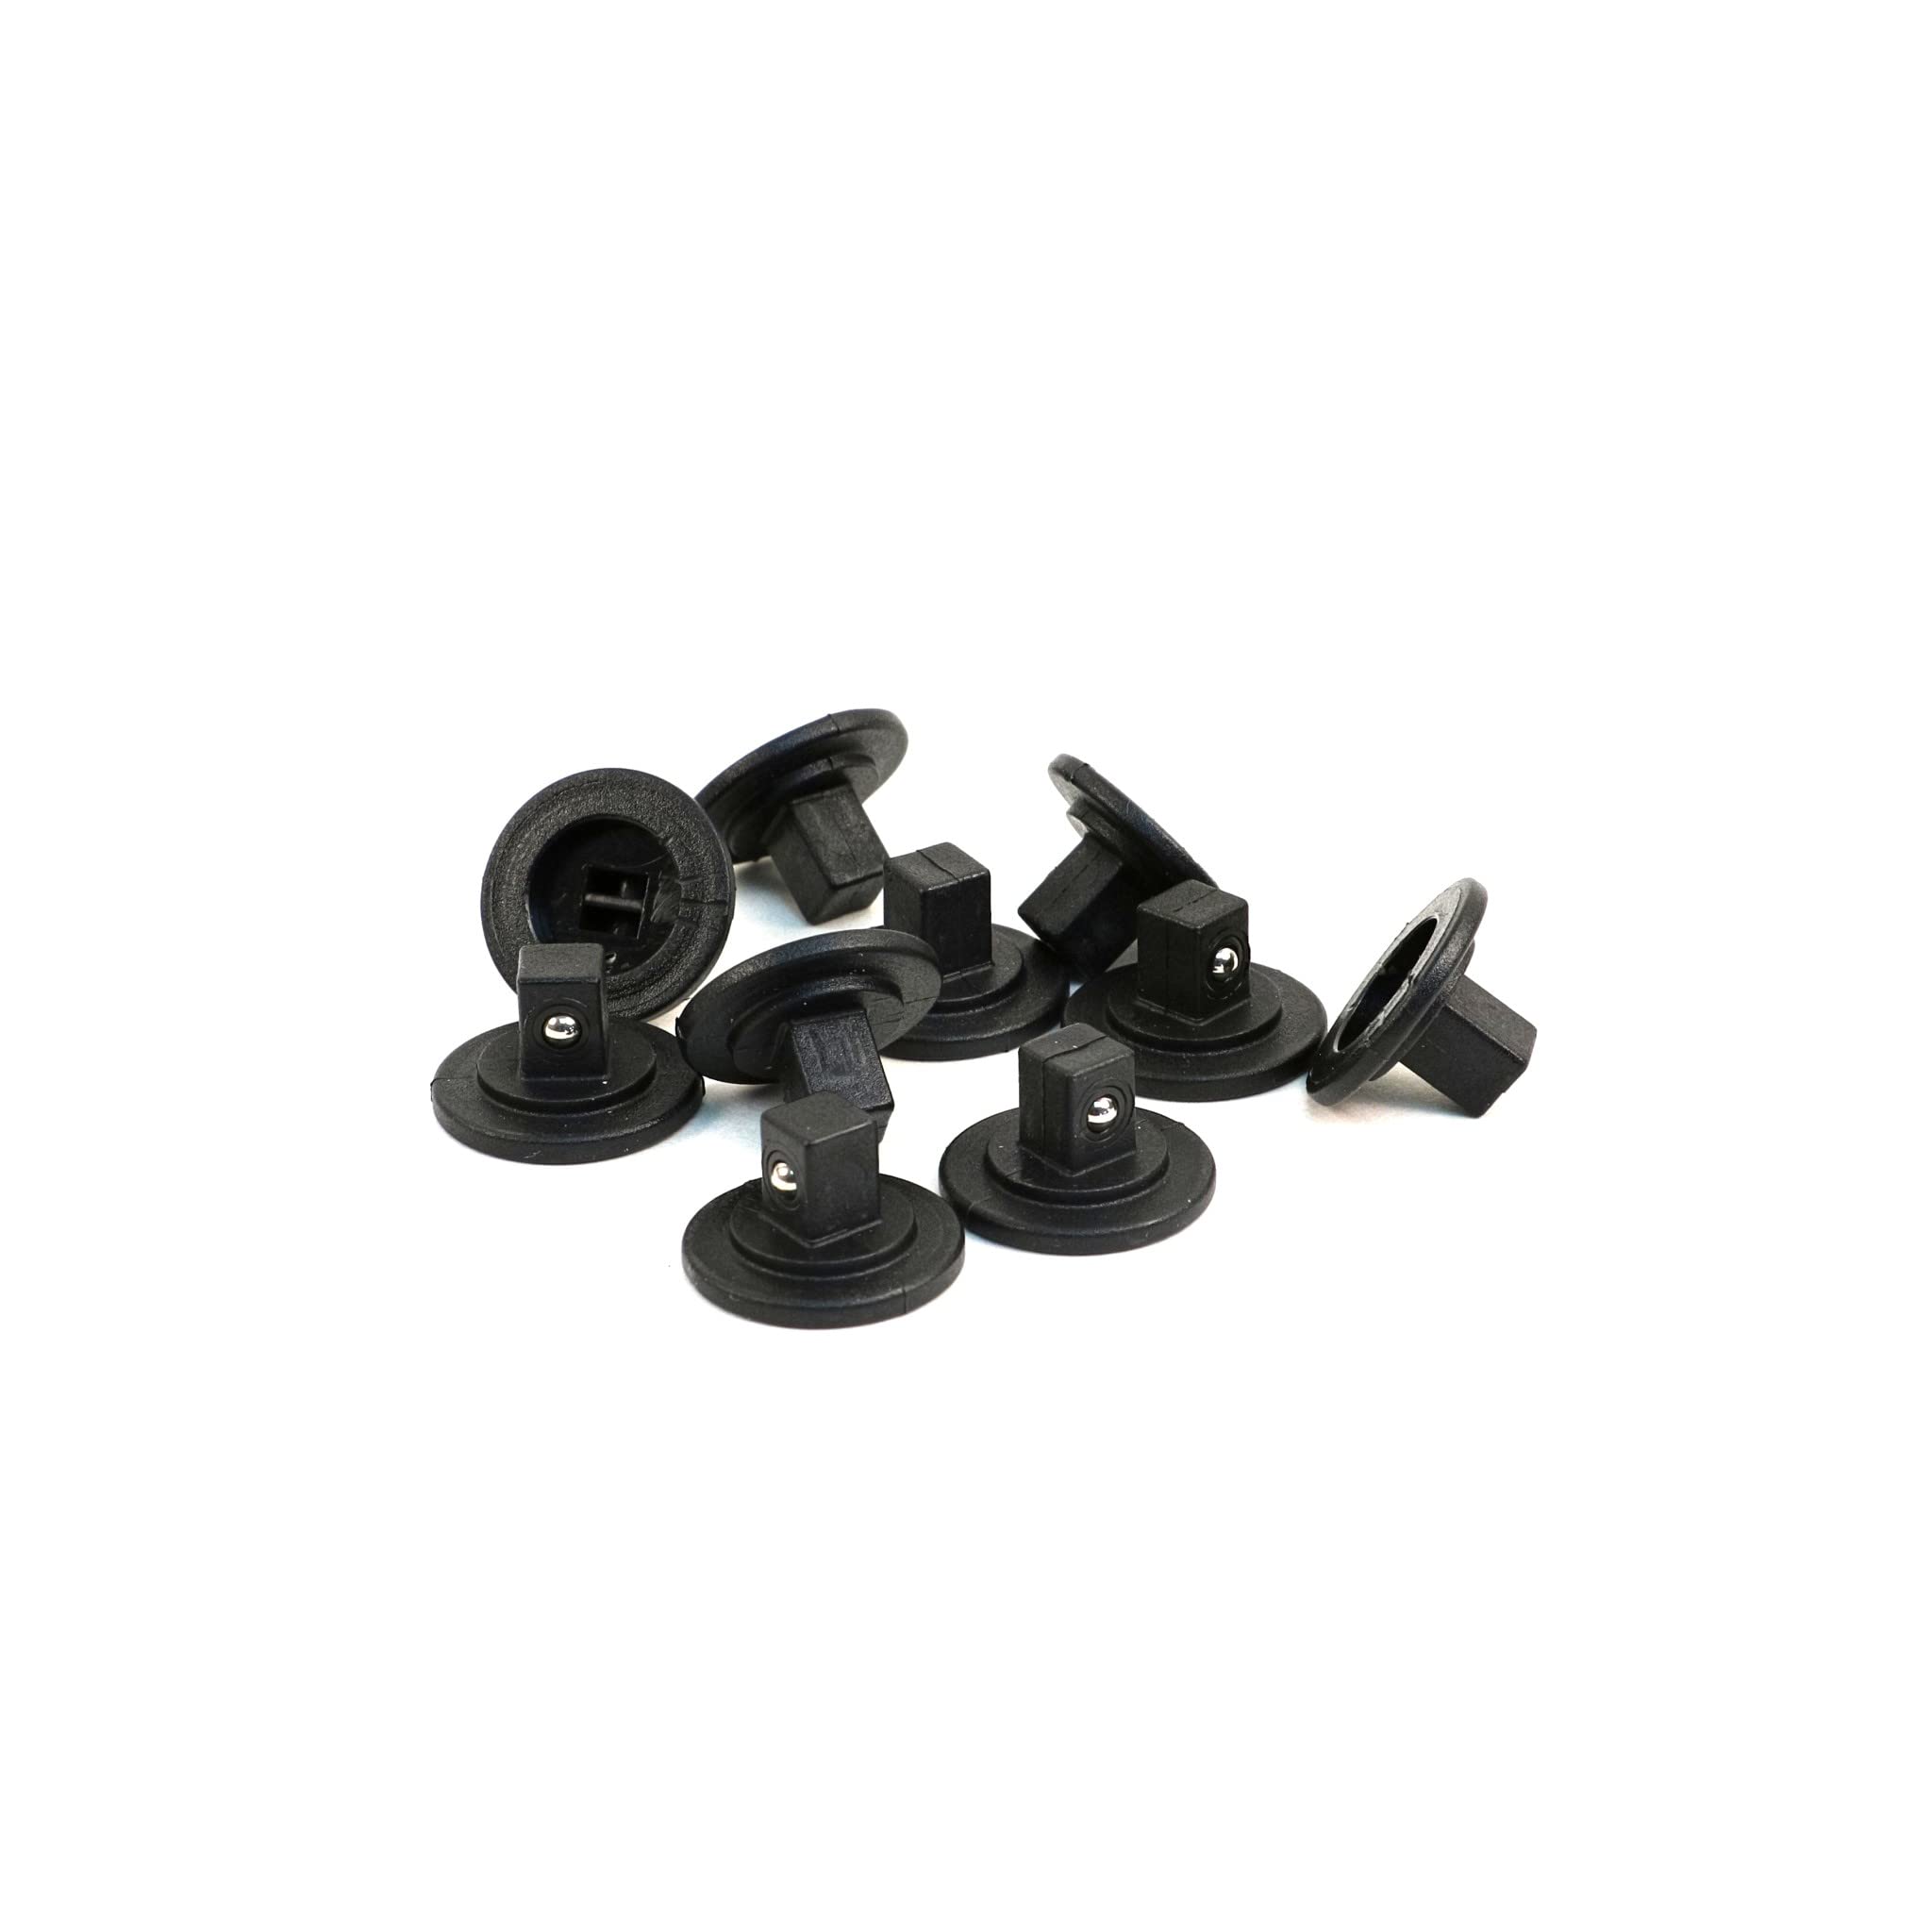 1/4 INCH DRIVE SOCKET PEGS  10 PACK